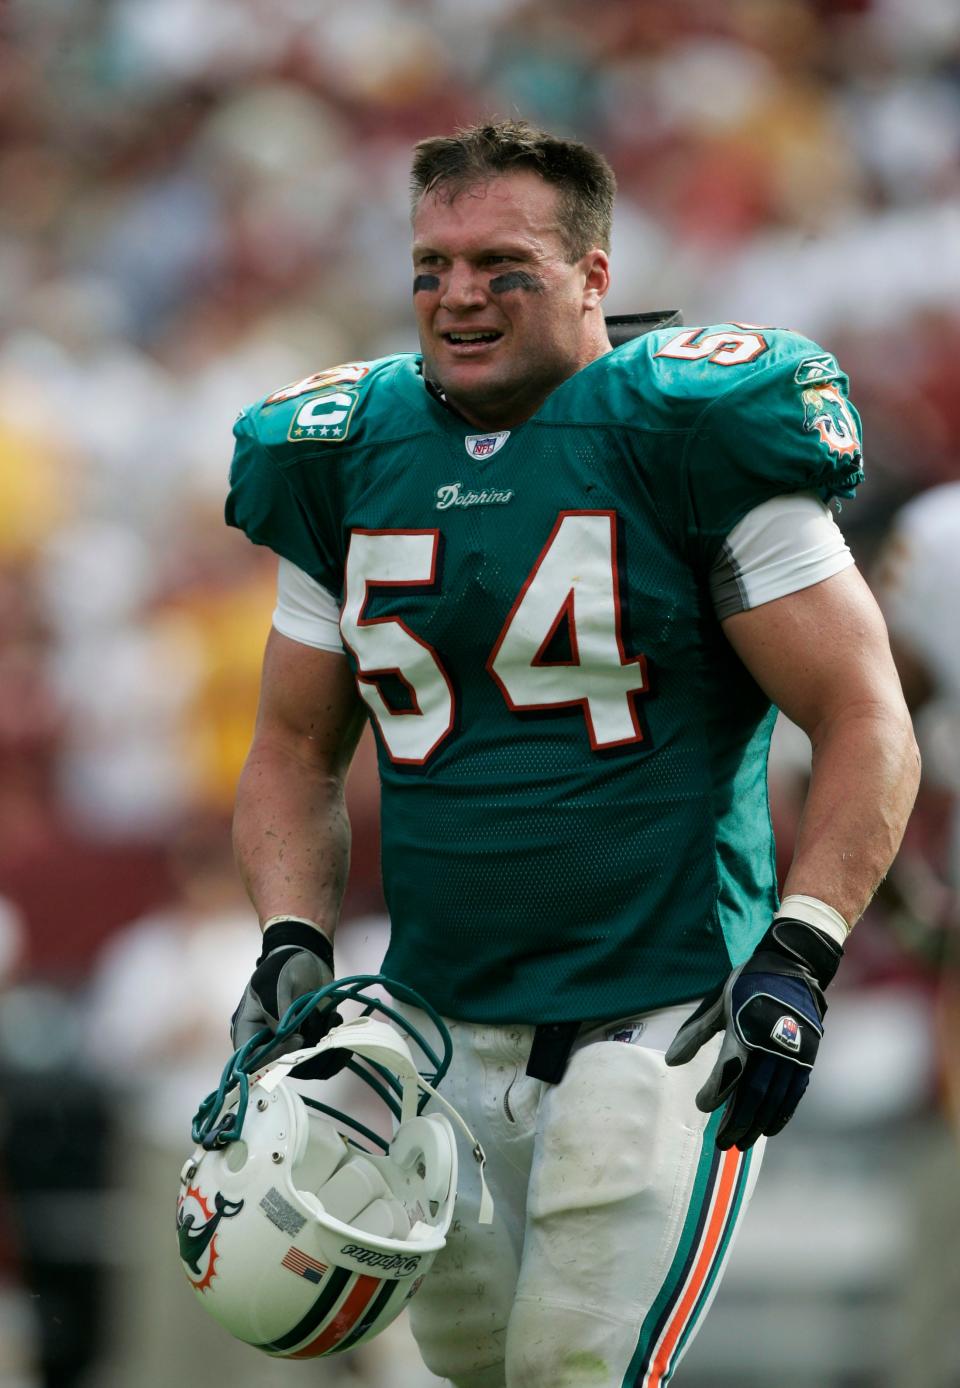 Zach Thomas was a first-team All-Pro five times and a second-team All-Pro two times during a 13-year NFL career spent primarily with the Miami Dolphins. Thomas, in his 10th season of eligibility for the Pro Football Hall of Fame, made the list of finalists for the fourth time on Wednesday.